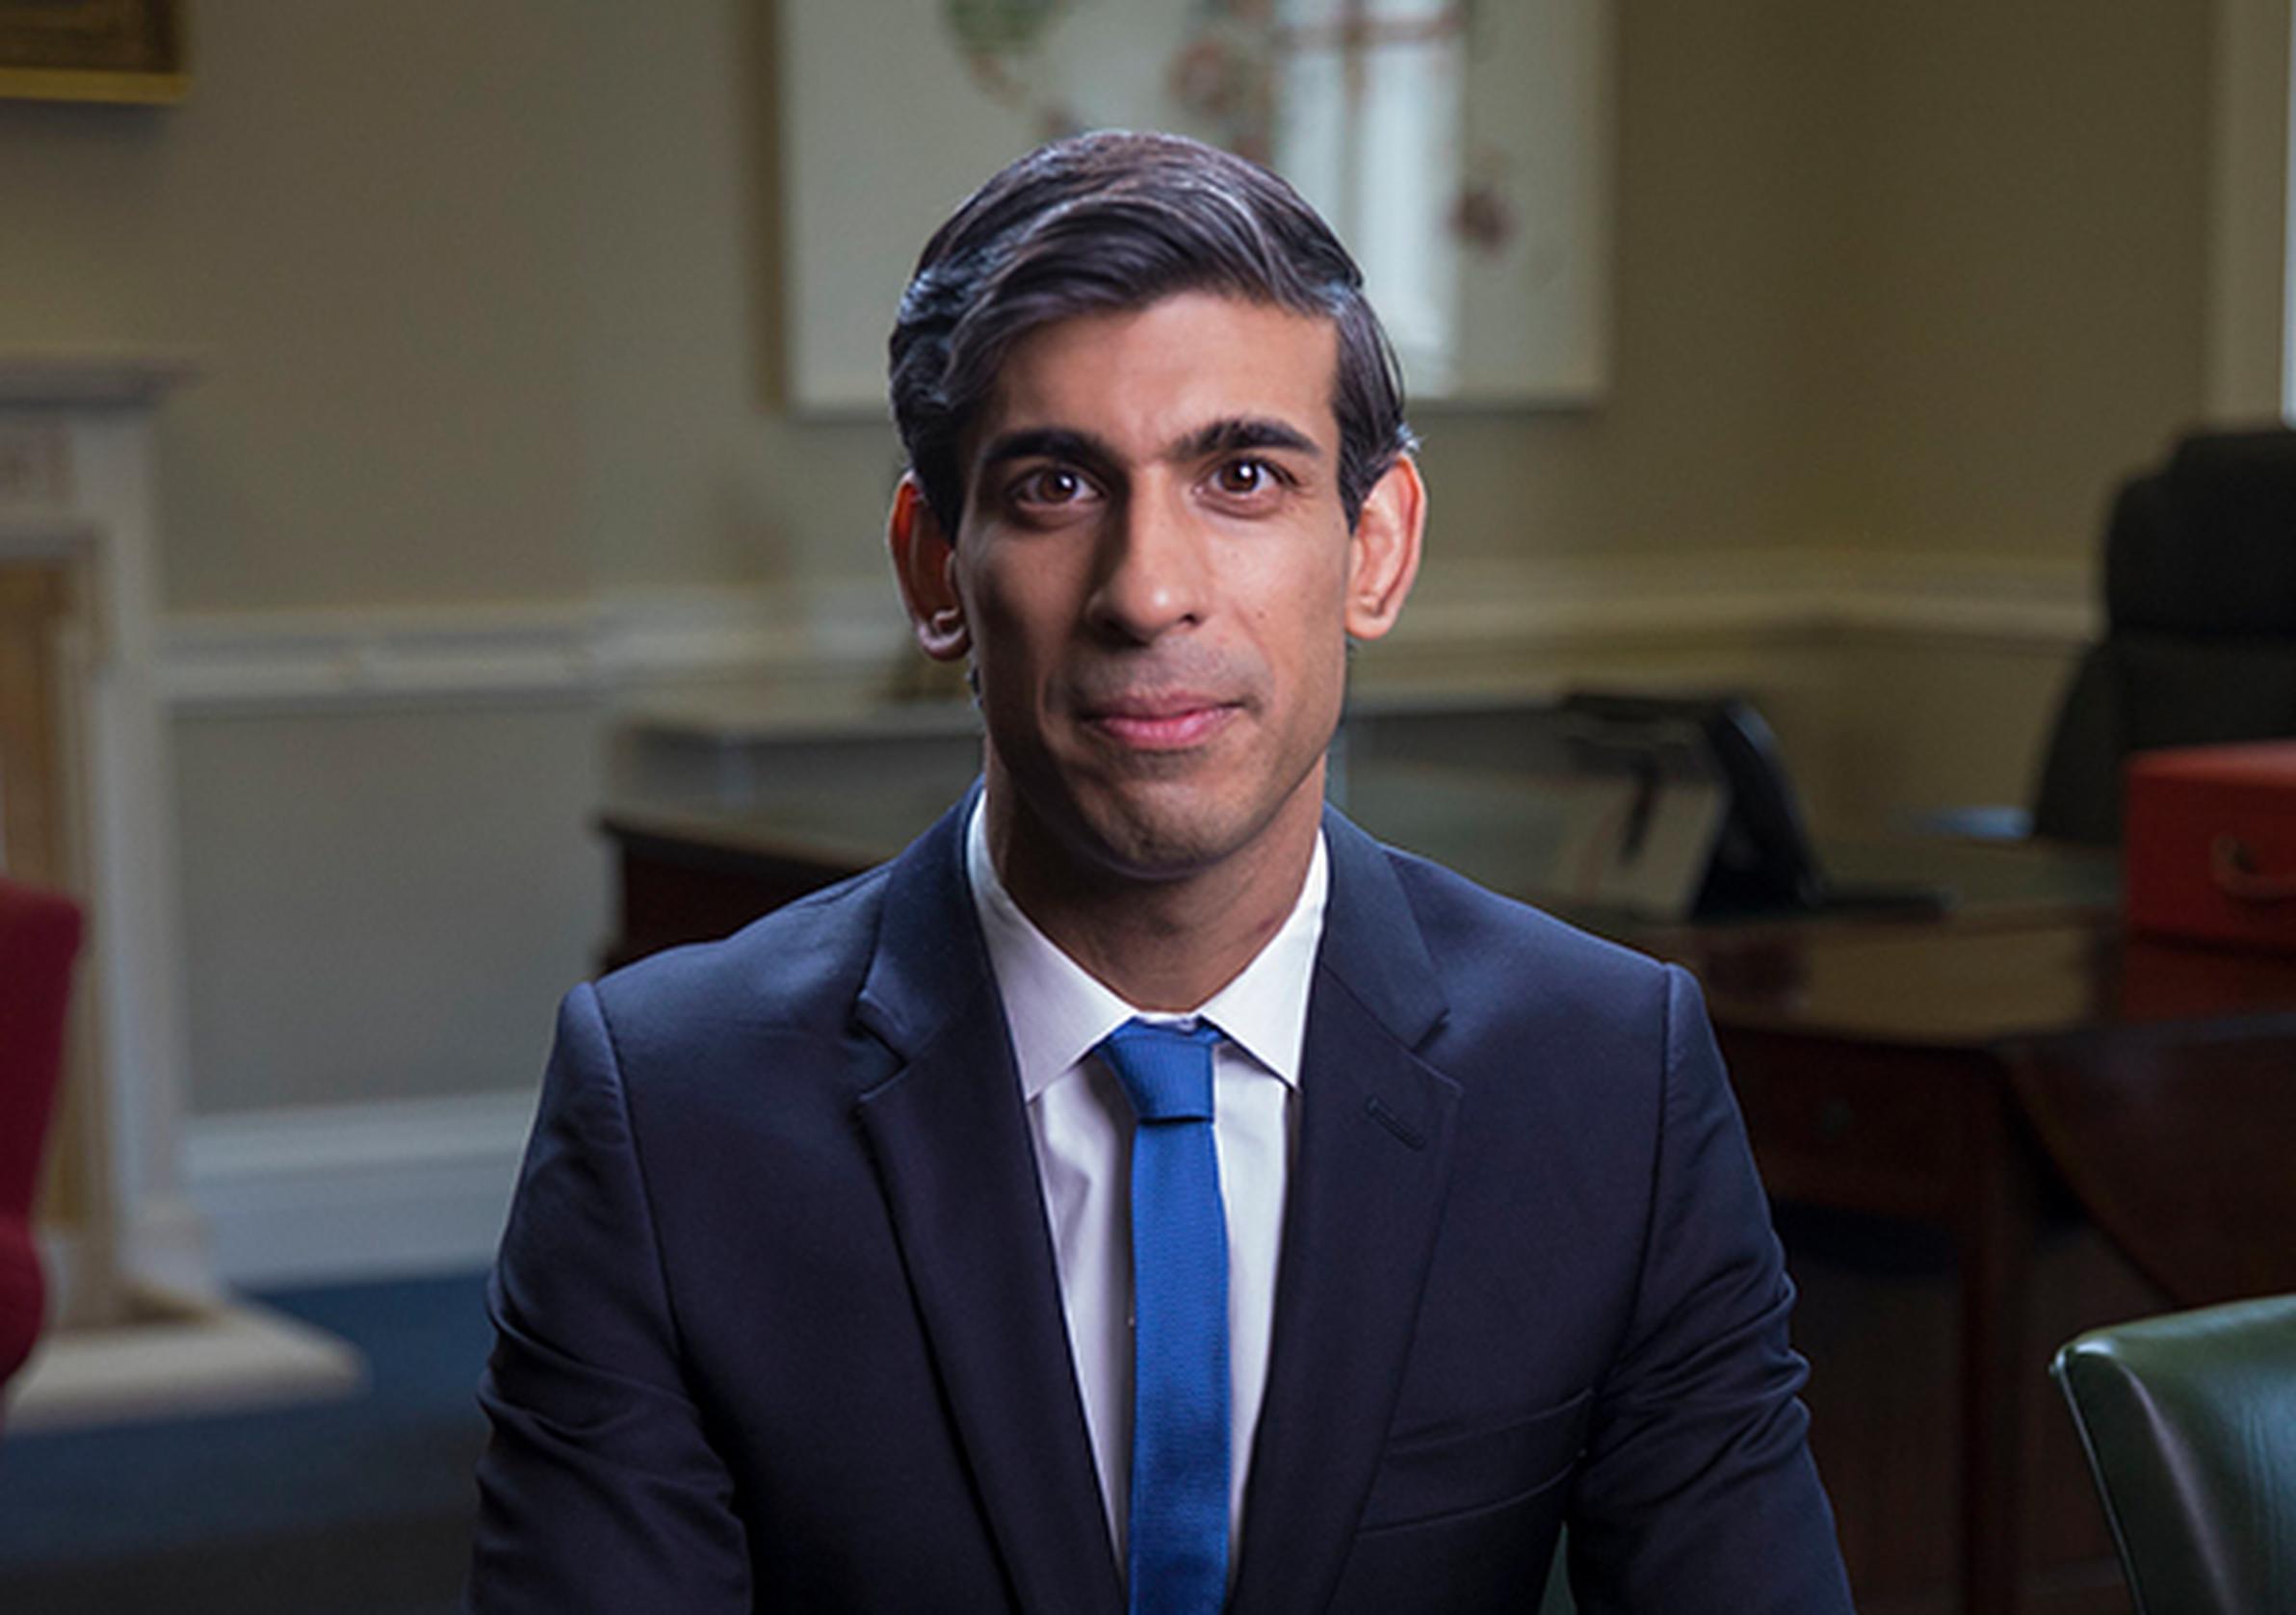 Rishi Sunak: `We want to ensure that no matter where you live, you have the same opportunities to get around easily and can feel pride in your local area – which is why protecting our local bus services is so important.